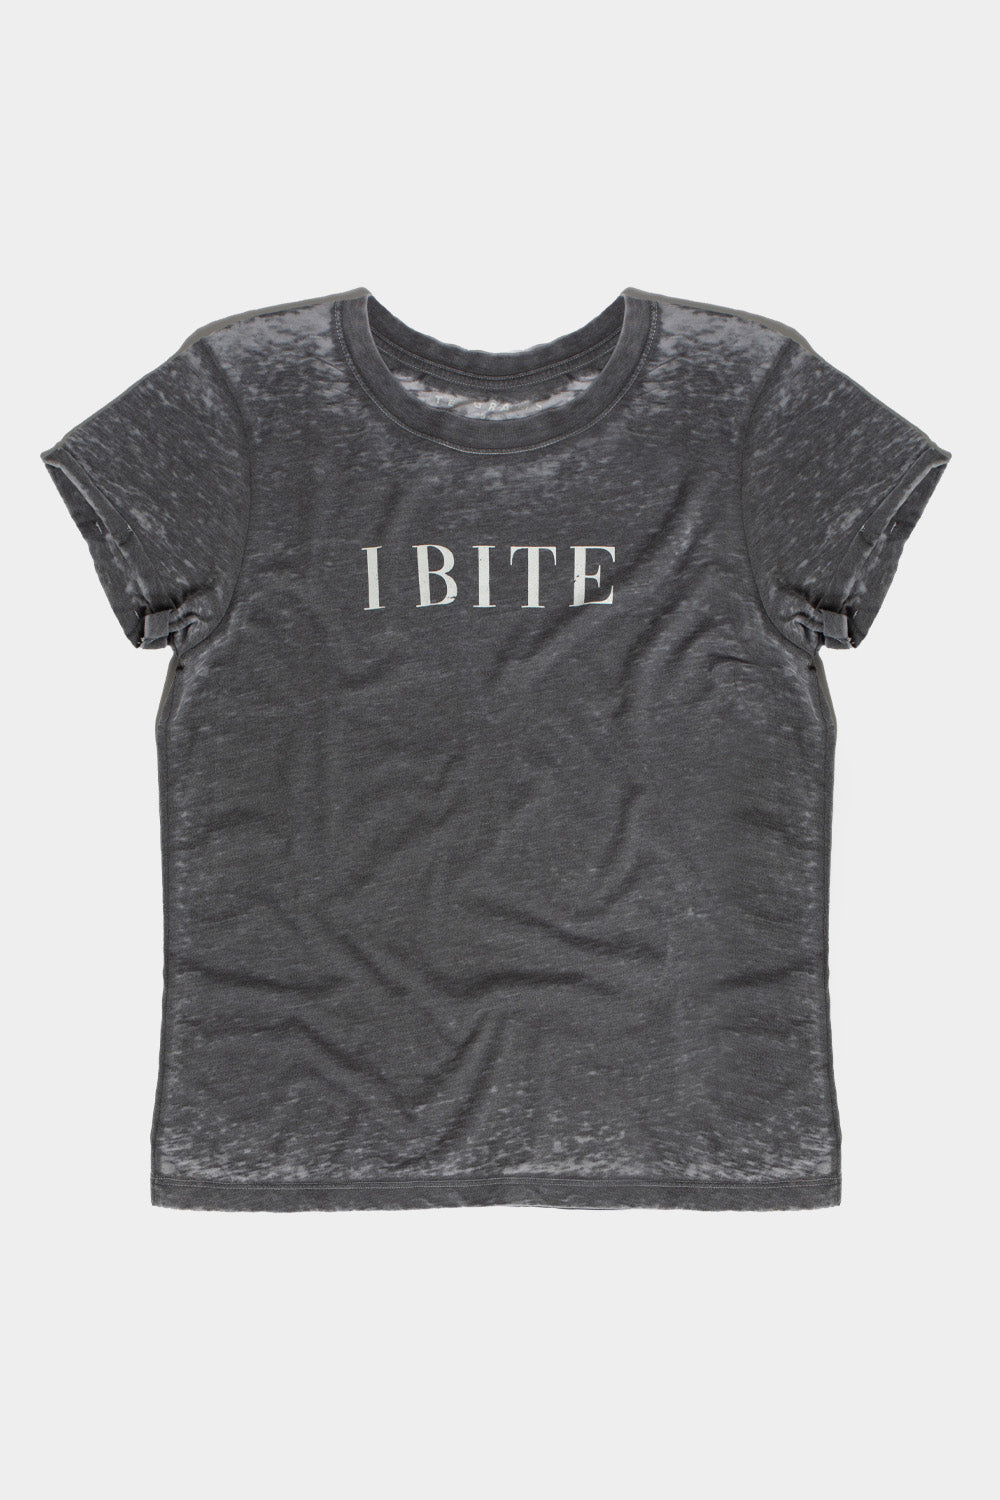 I Bite Grey Fitted Tee